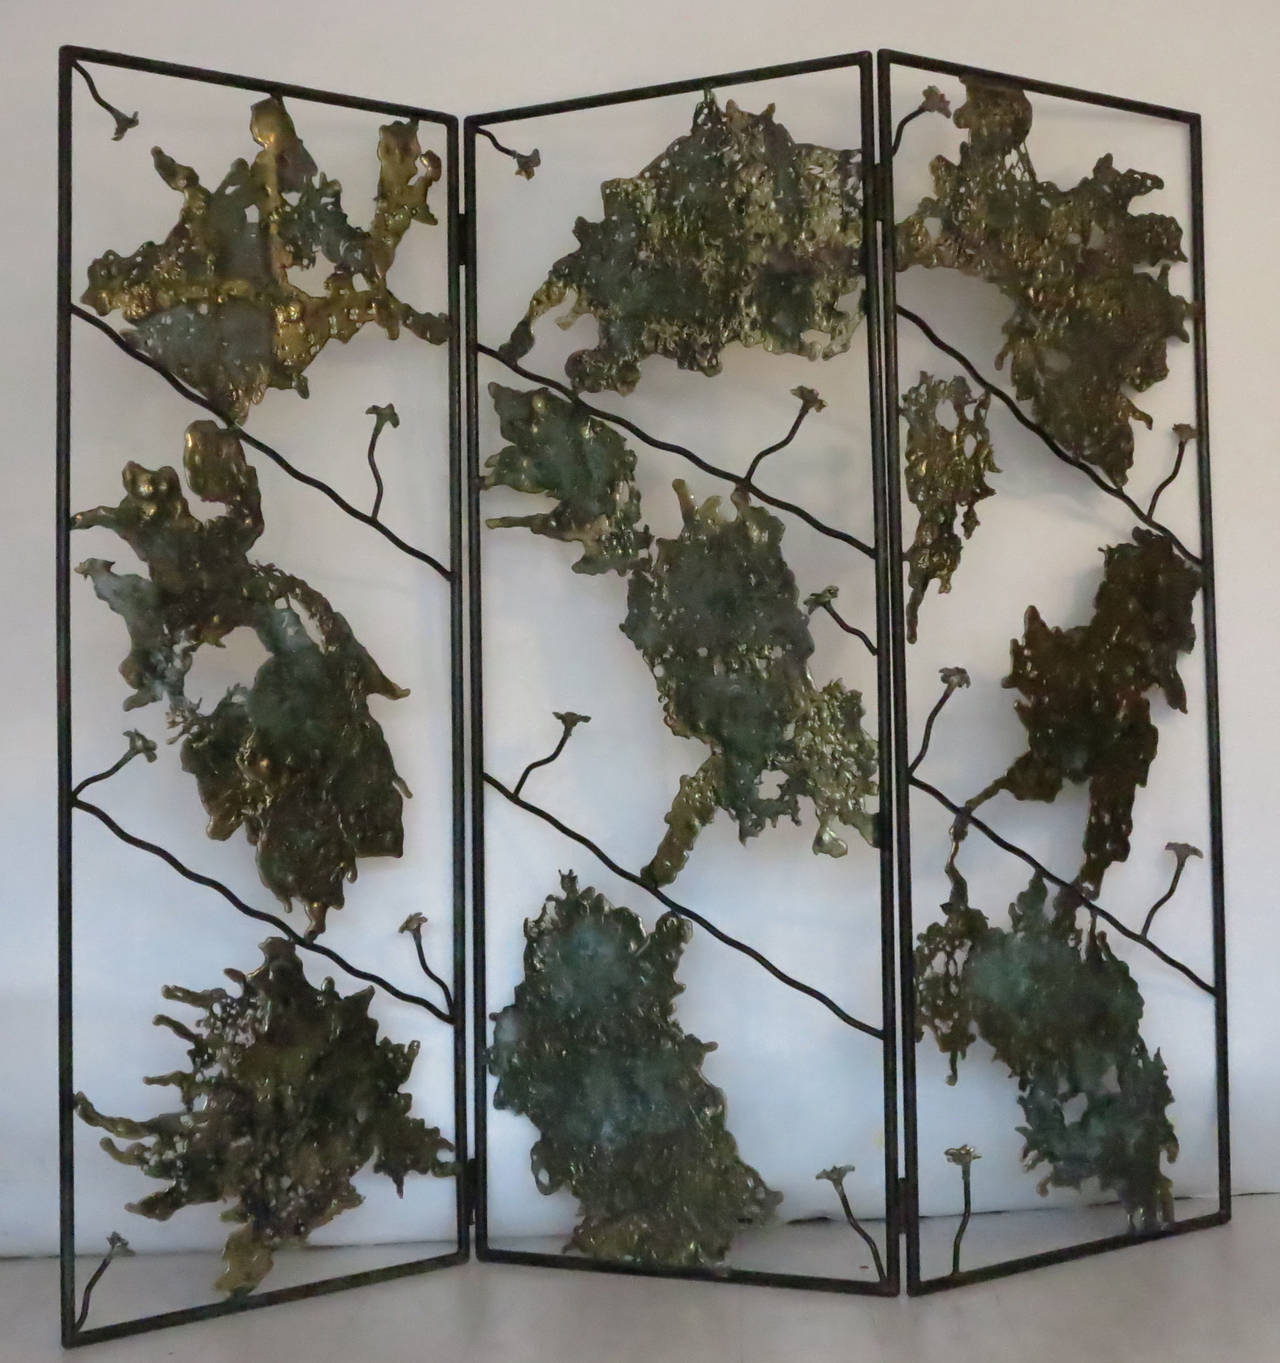 Beautifully crafted spill cast bronze screen/room divider in the style of Silas Seandel or Harry Bertoia, consisting of three panels, each measuring 76